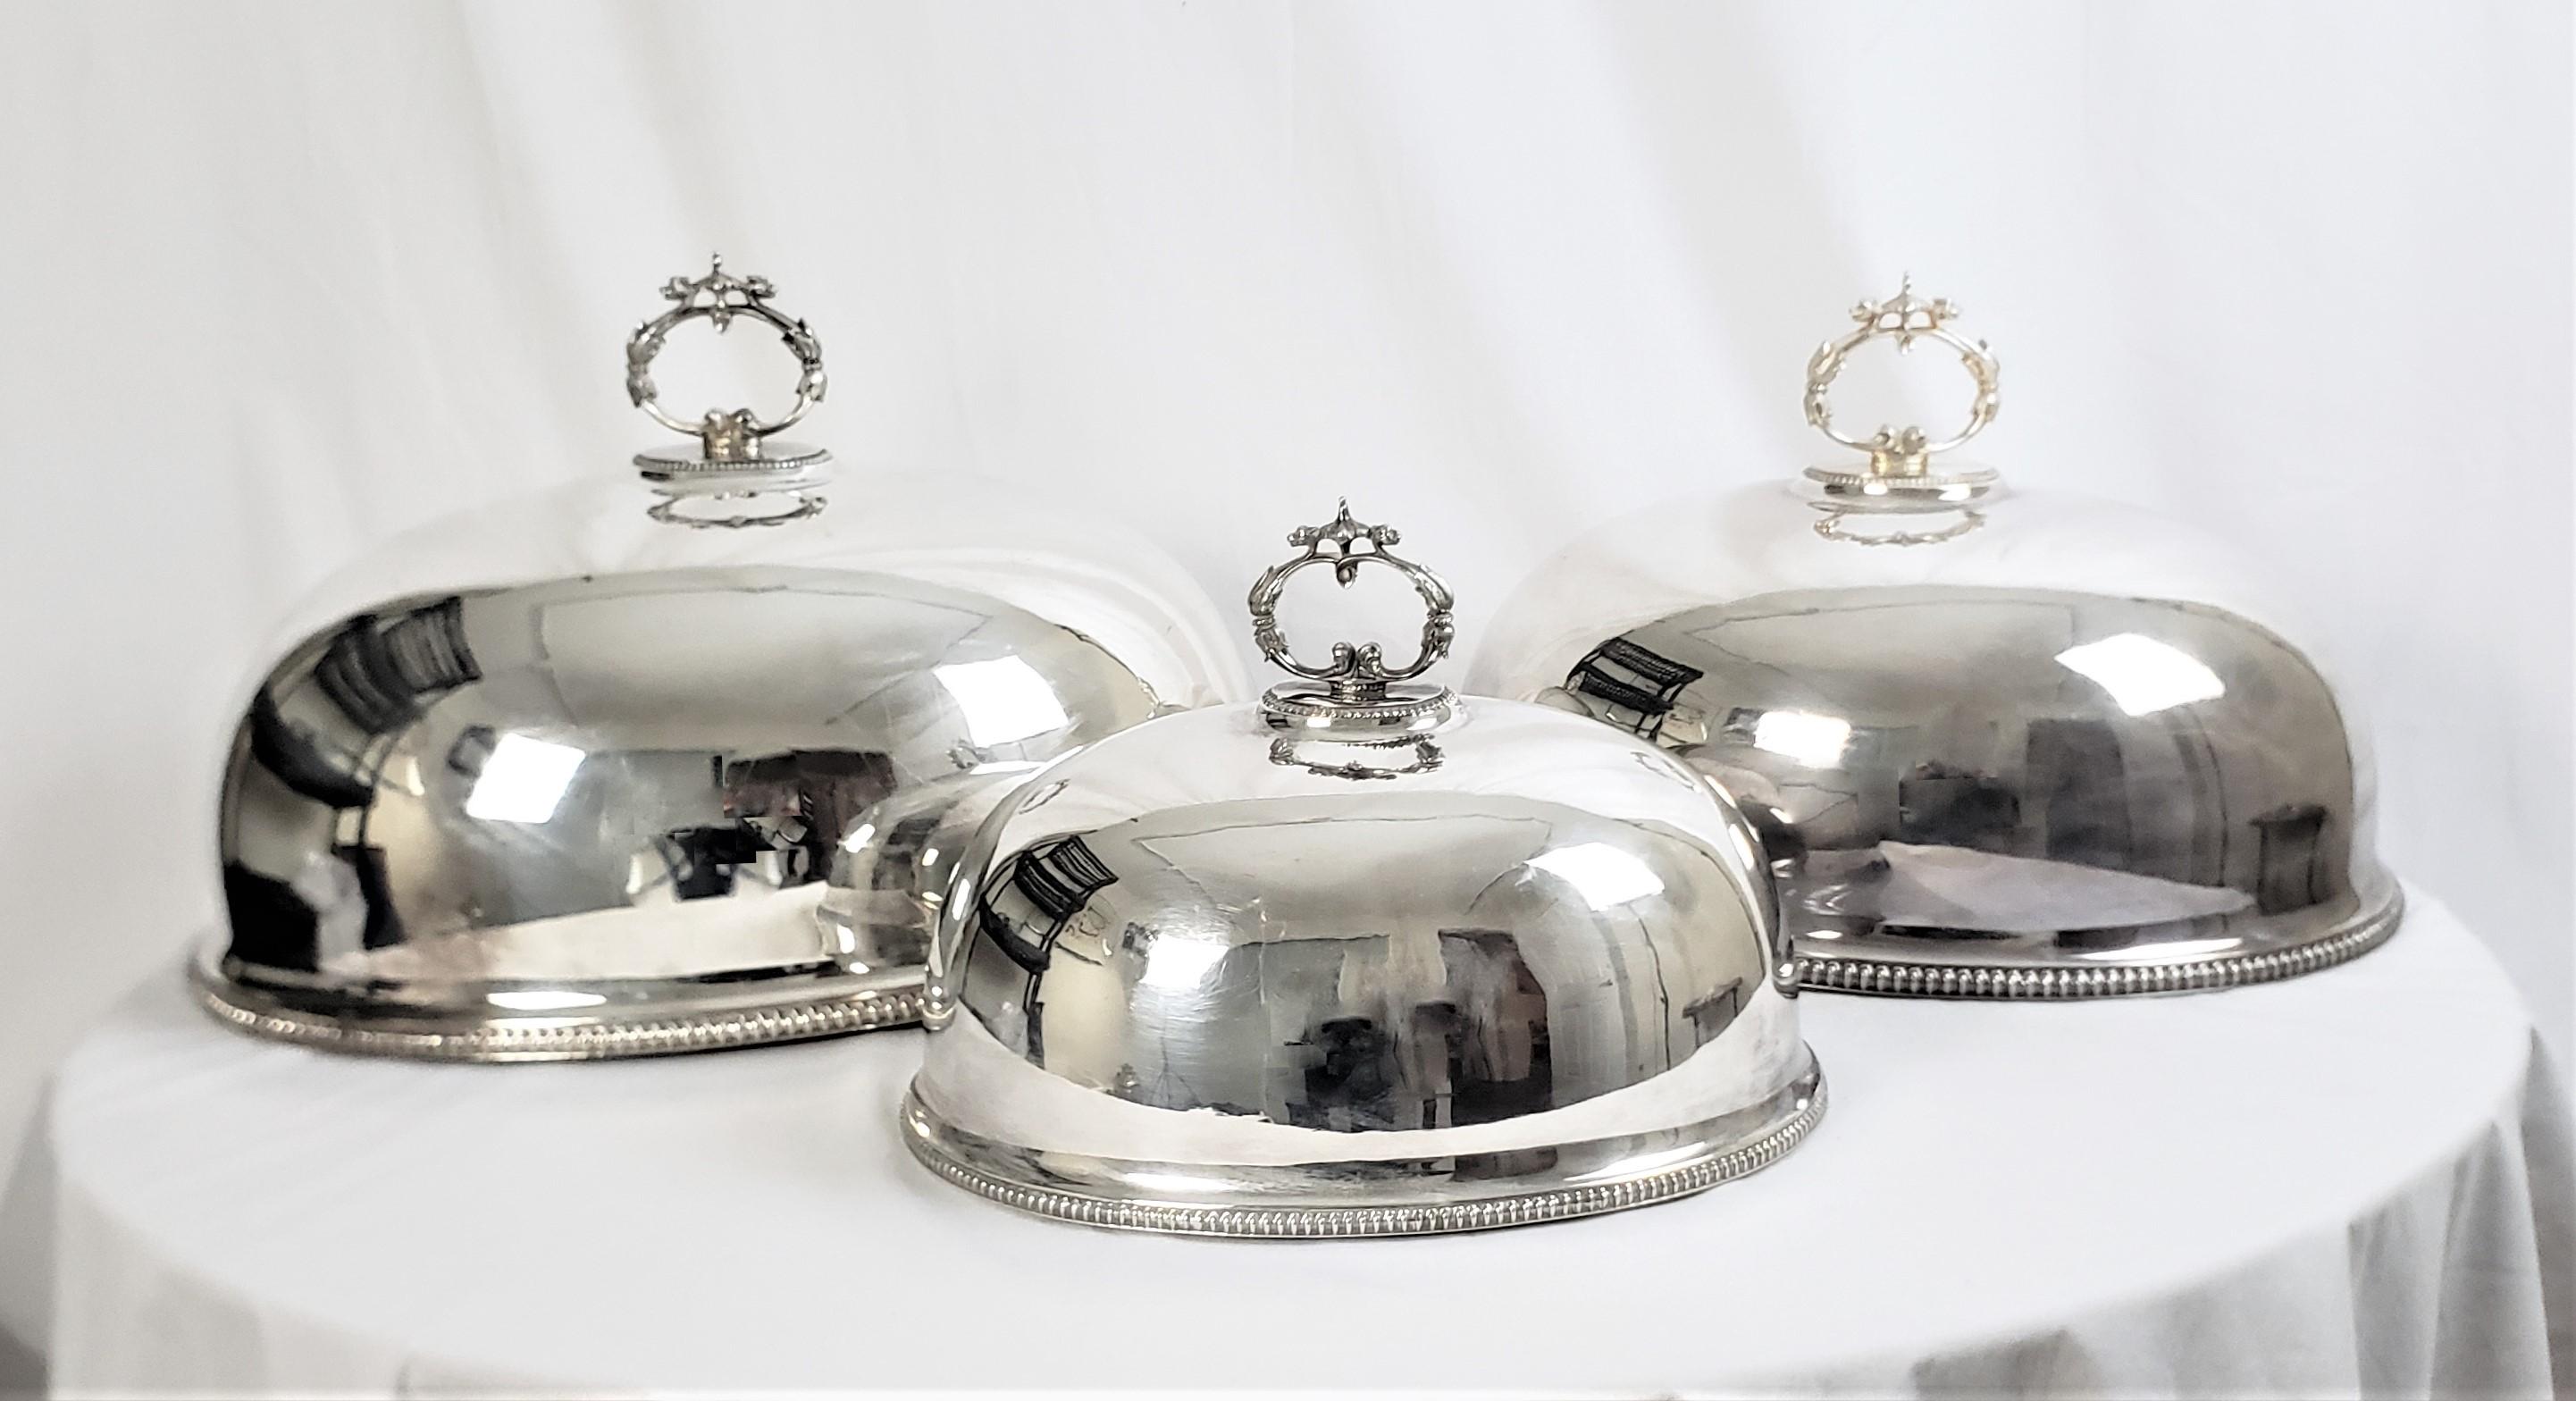 This set of antique meat domes are unsigned, but presumed to have originated from England and date to approximately 1890 and done in a period Victorian style. This graduated set of three domes have been hand-crafted and silver plated with cast and